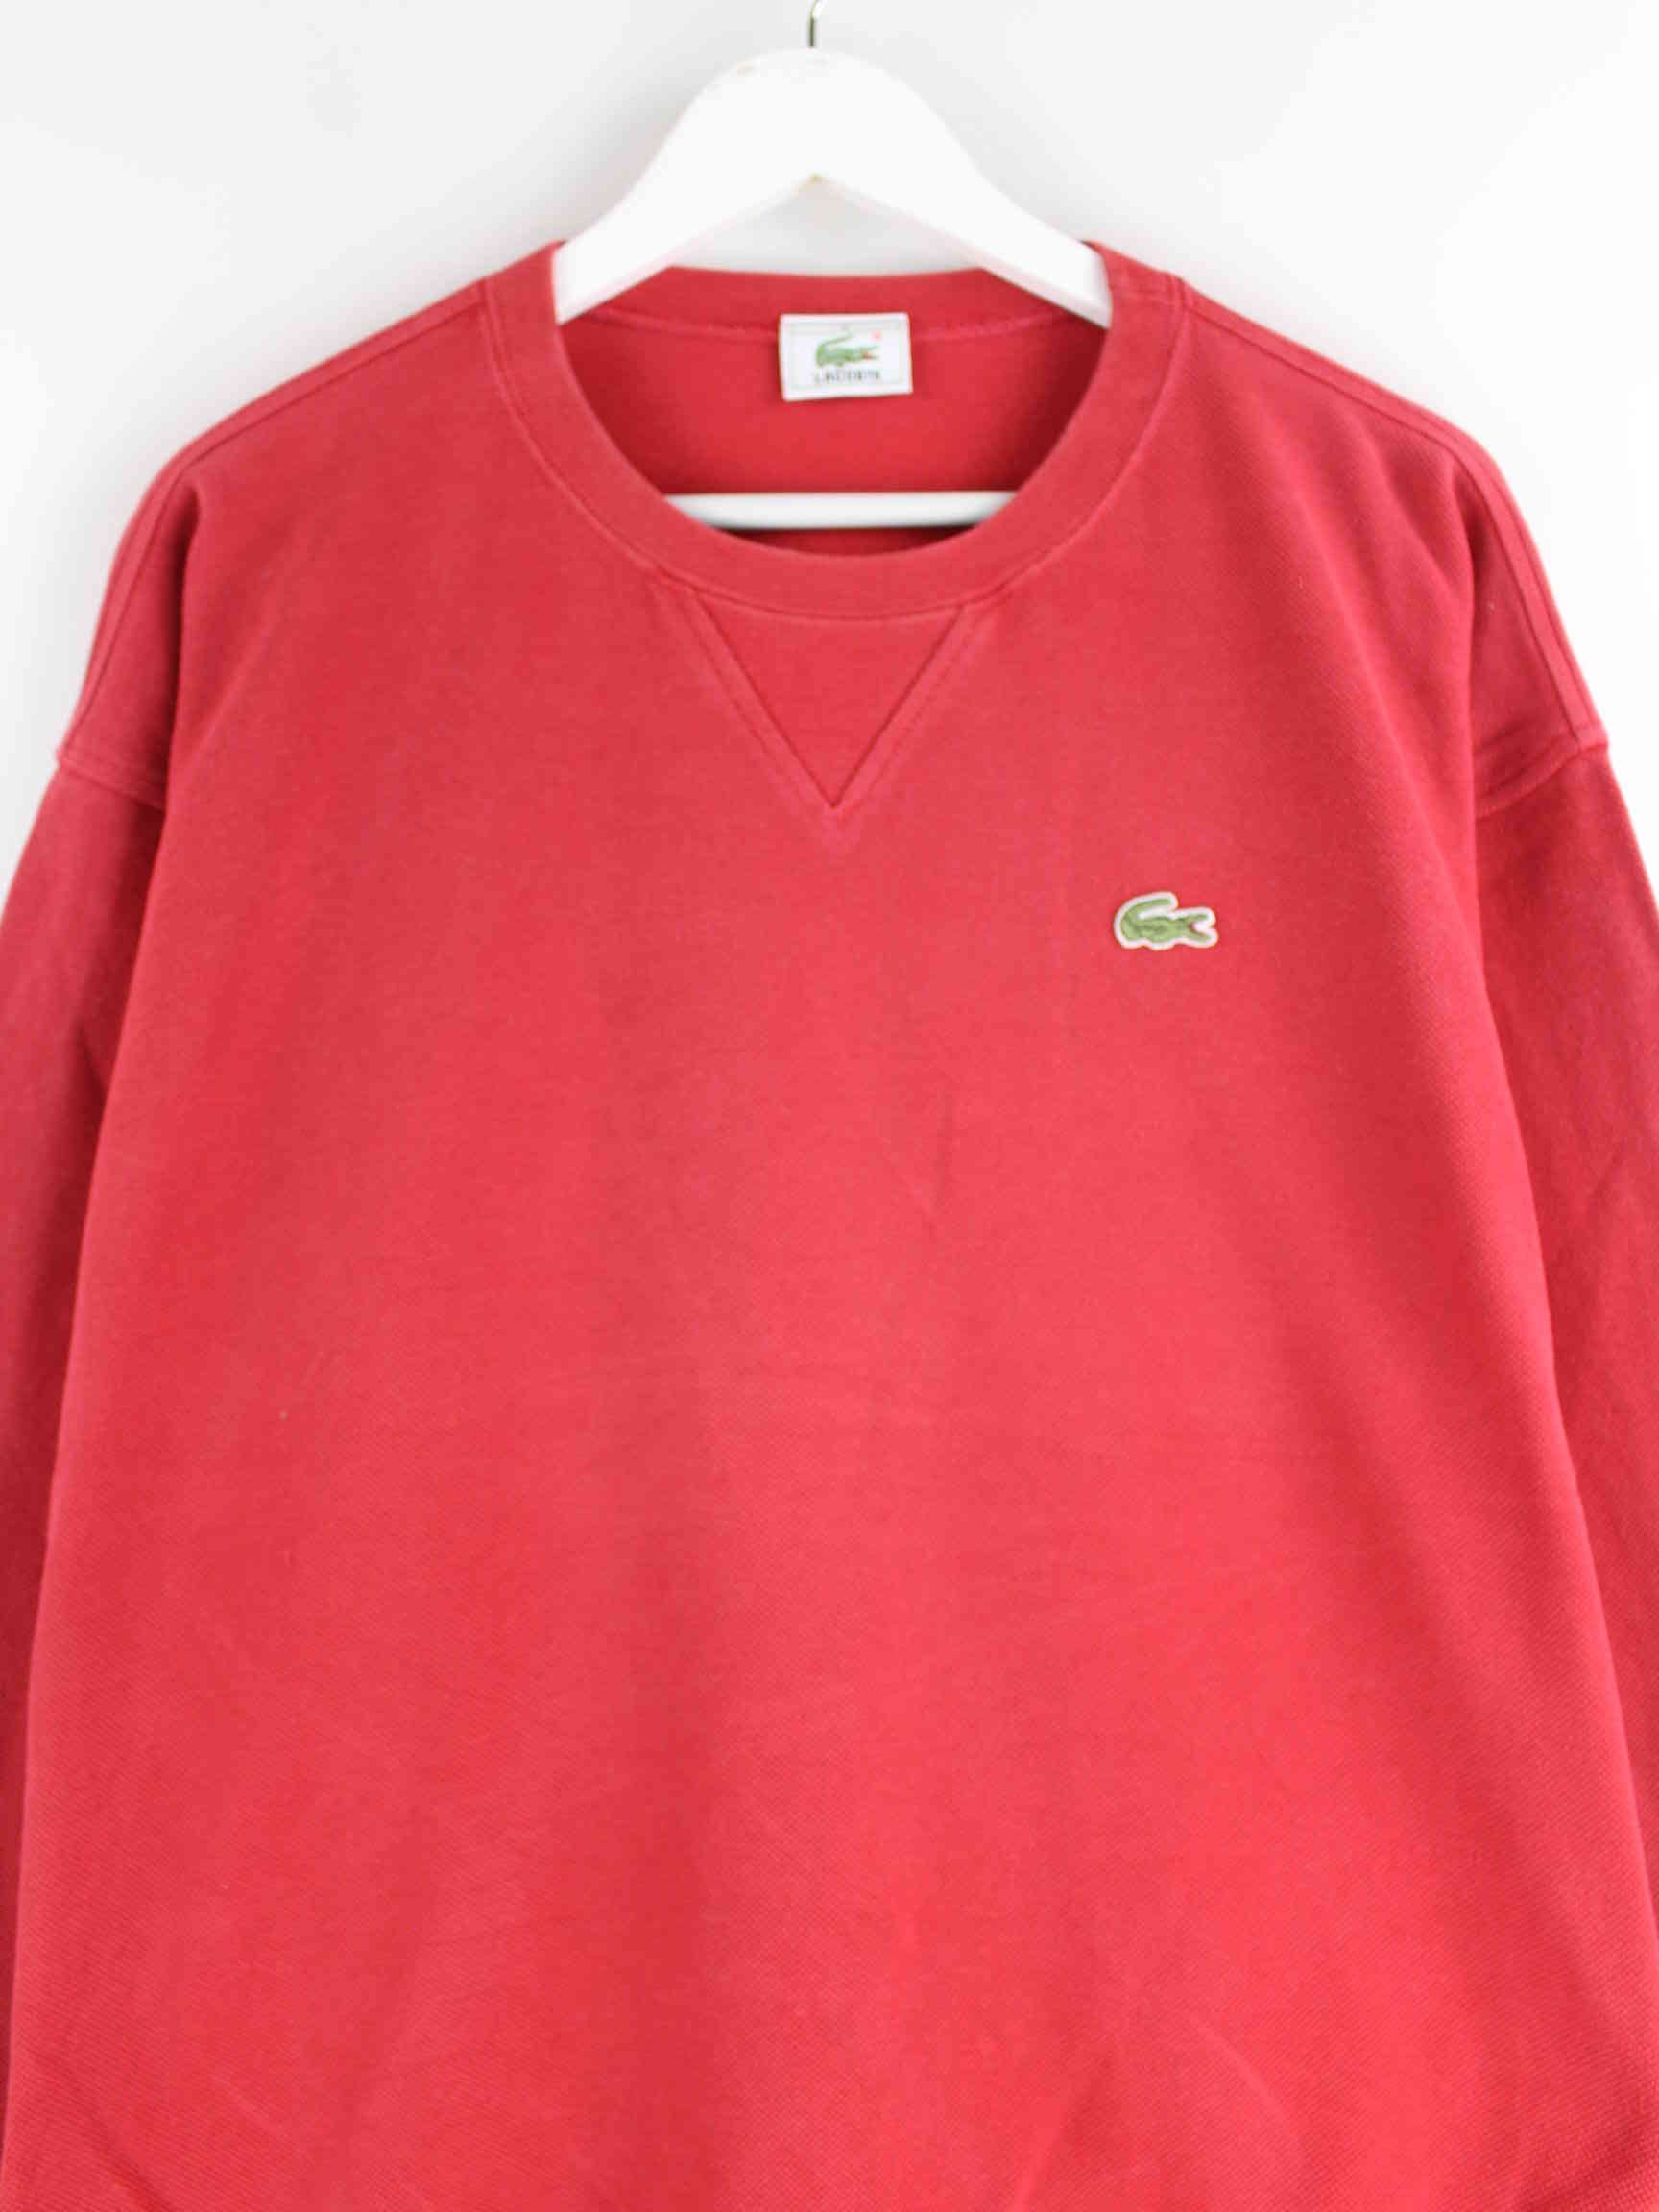 Lacoste 90s Vintage Sweater Rot L (detail image 1)